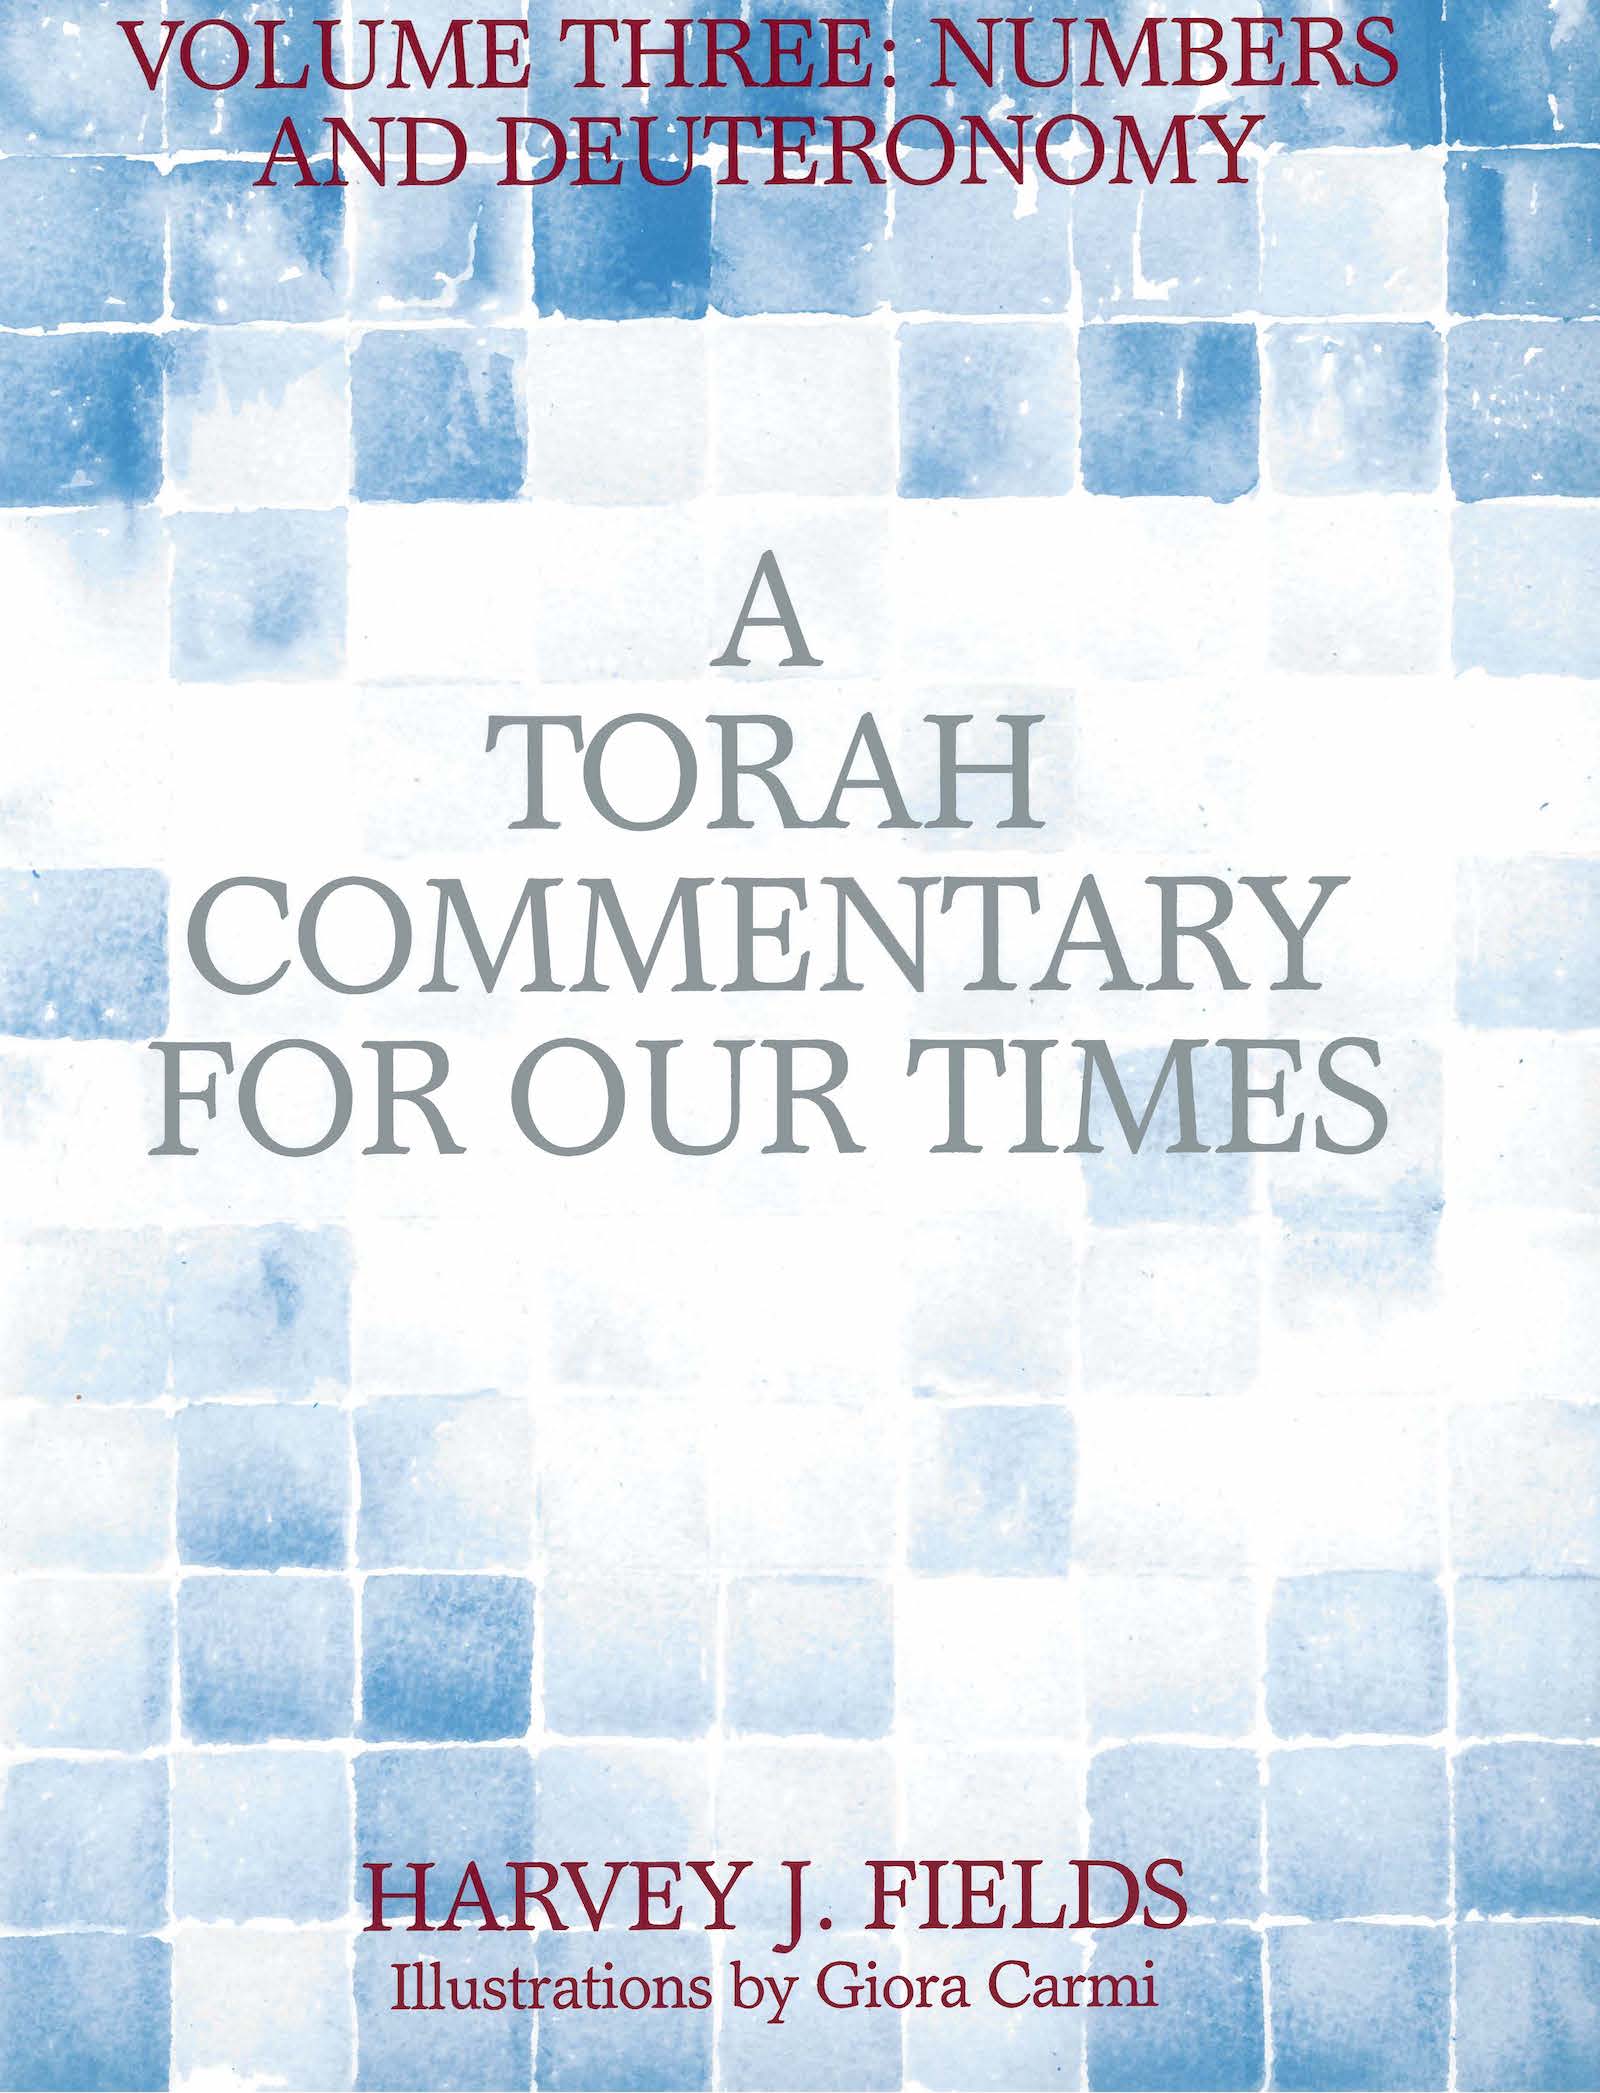 Torah Commentary for Our Times: Volume 3